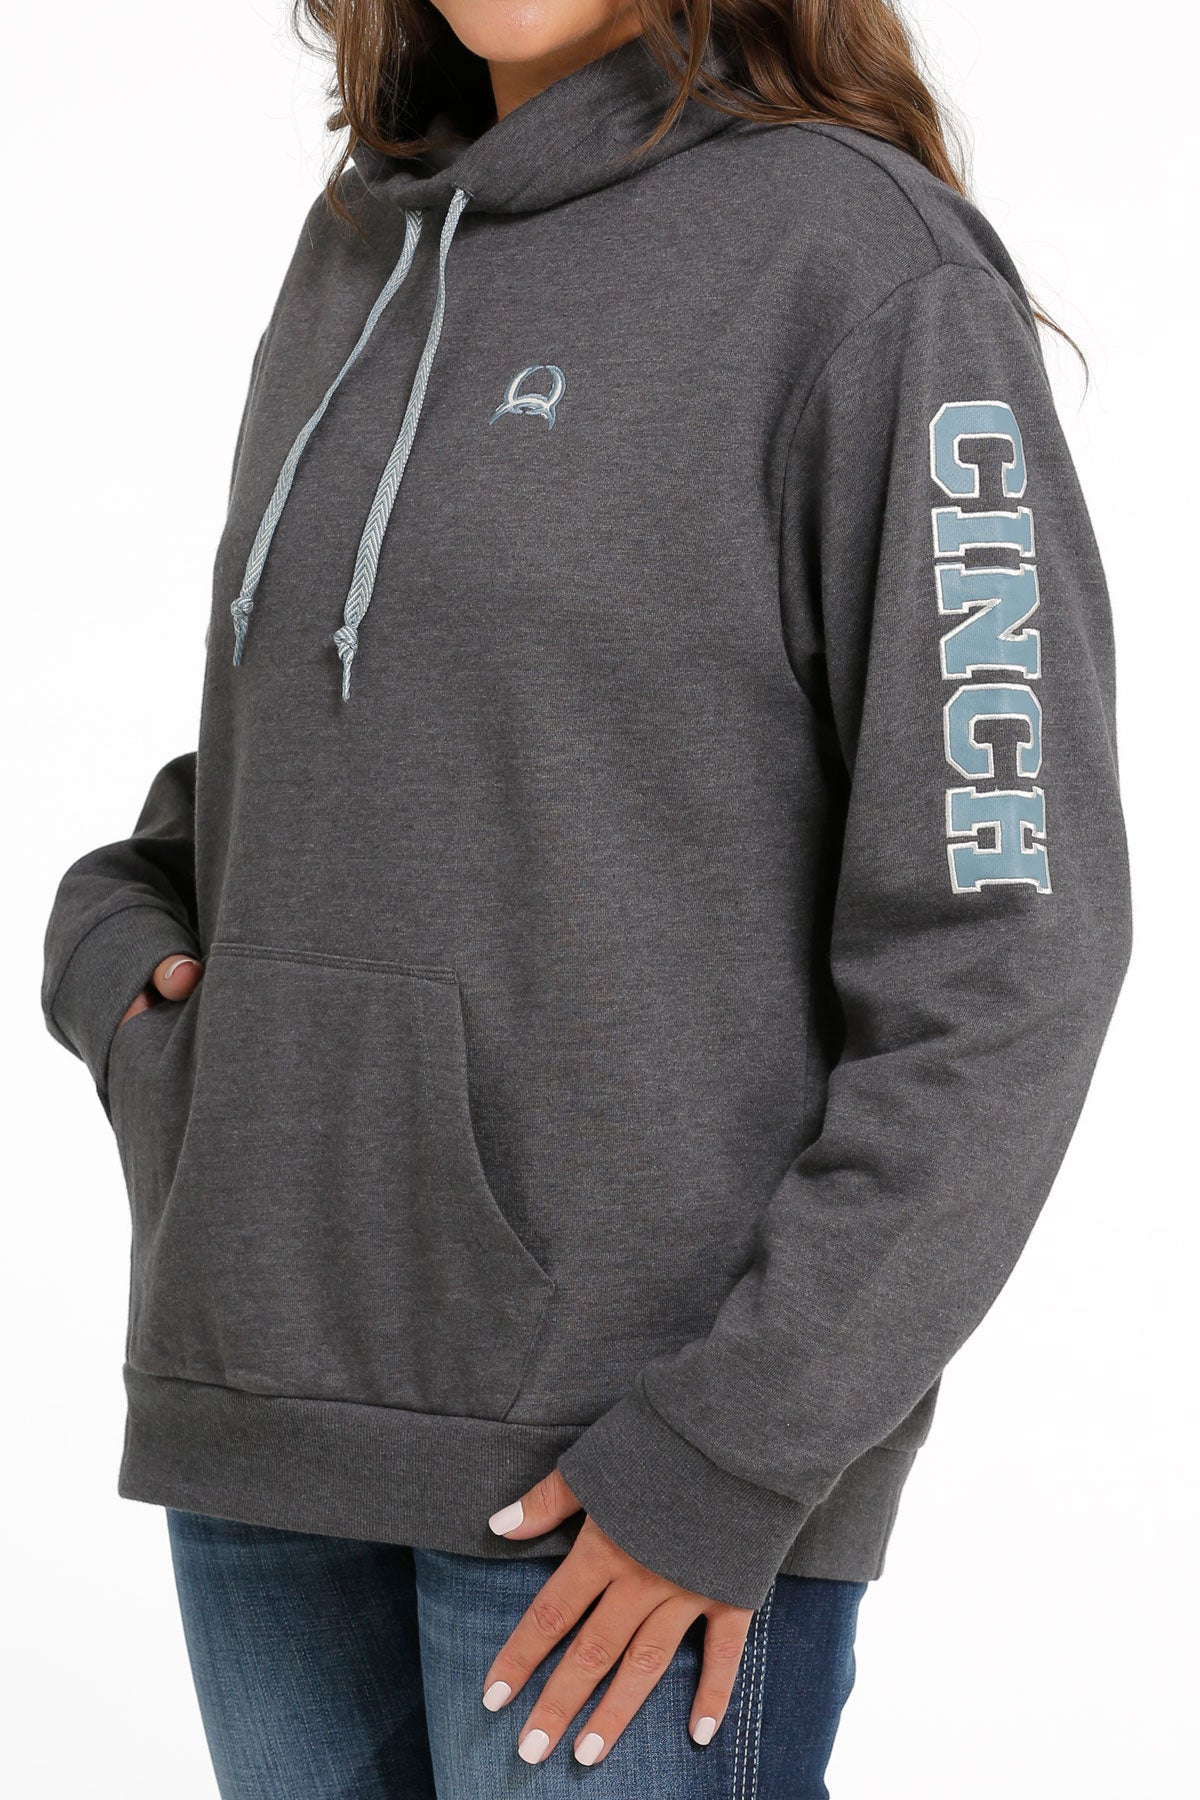 CINCH Women's Gray French Terry Pullover